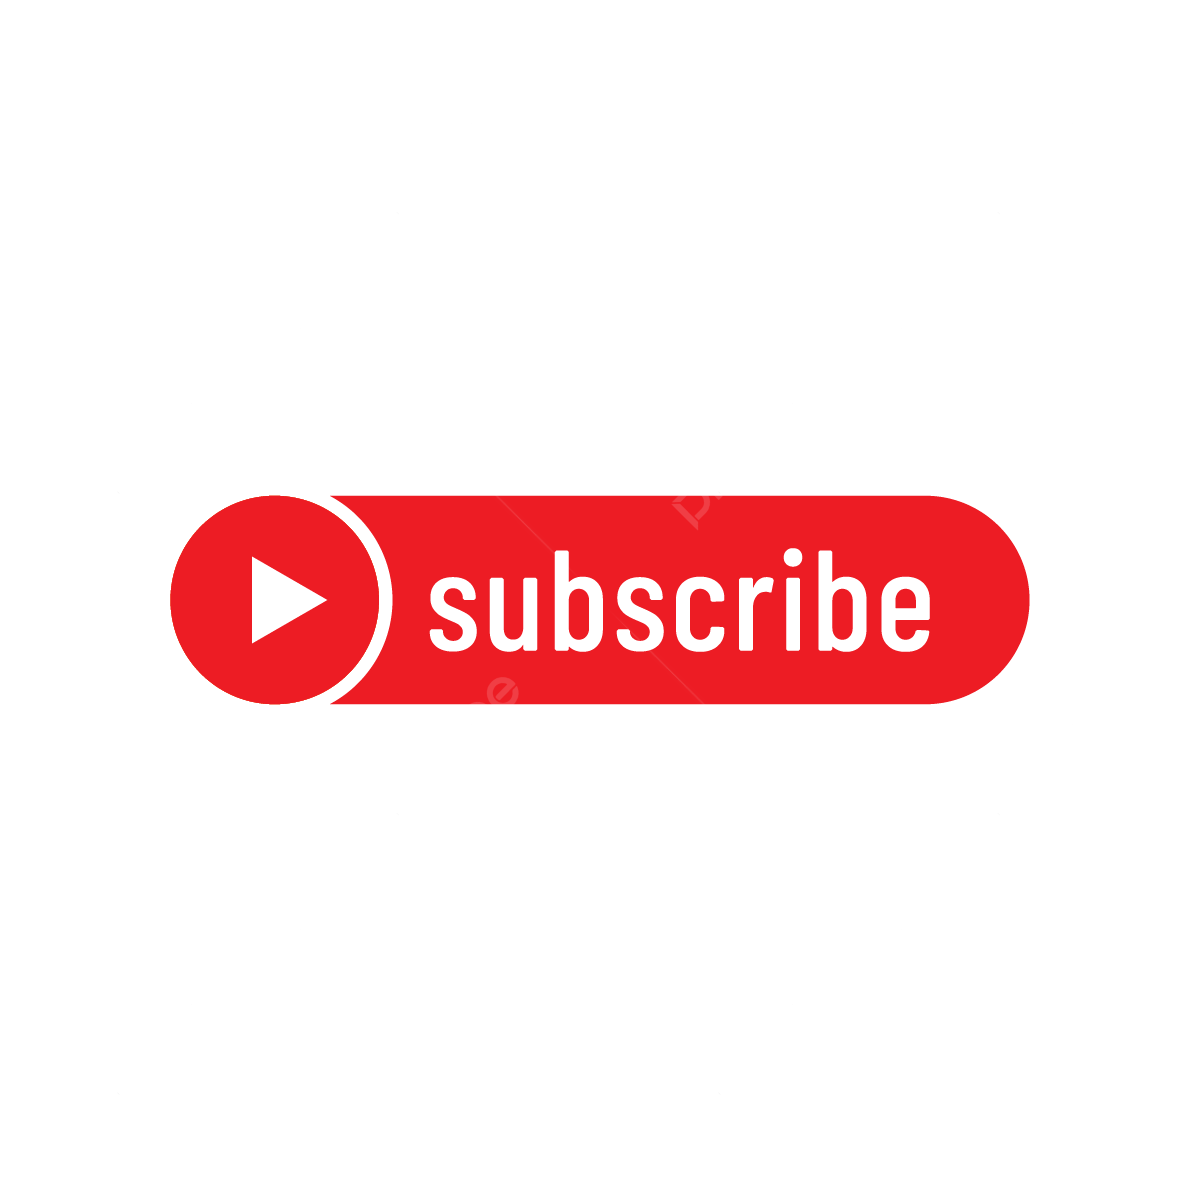 YouTube Subscribe Button PNG Image